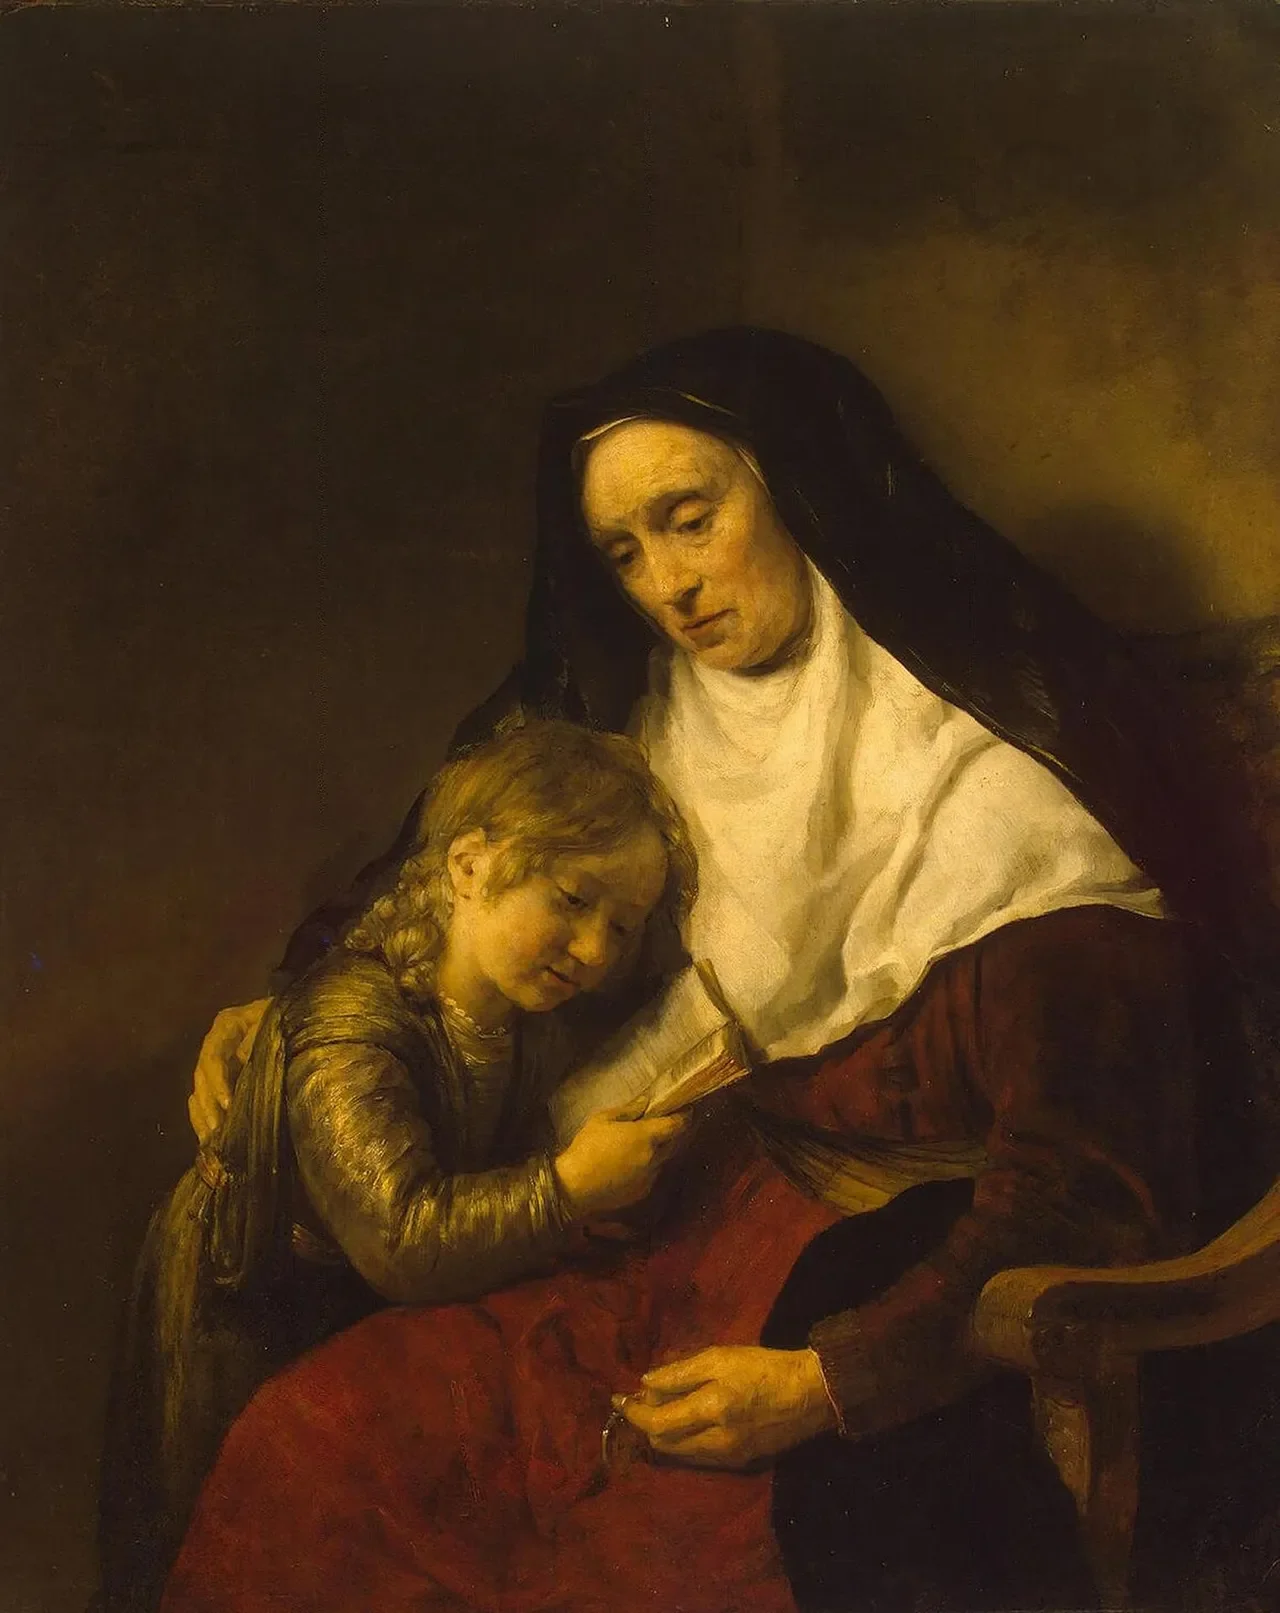 Artist's depiction of Timothy and Lois, by Willem Drost, 1650. (Image Source: WikiMedia Commons)